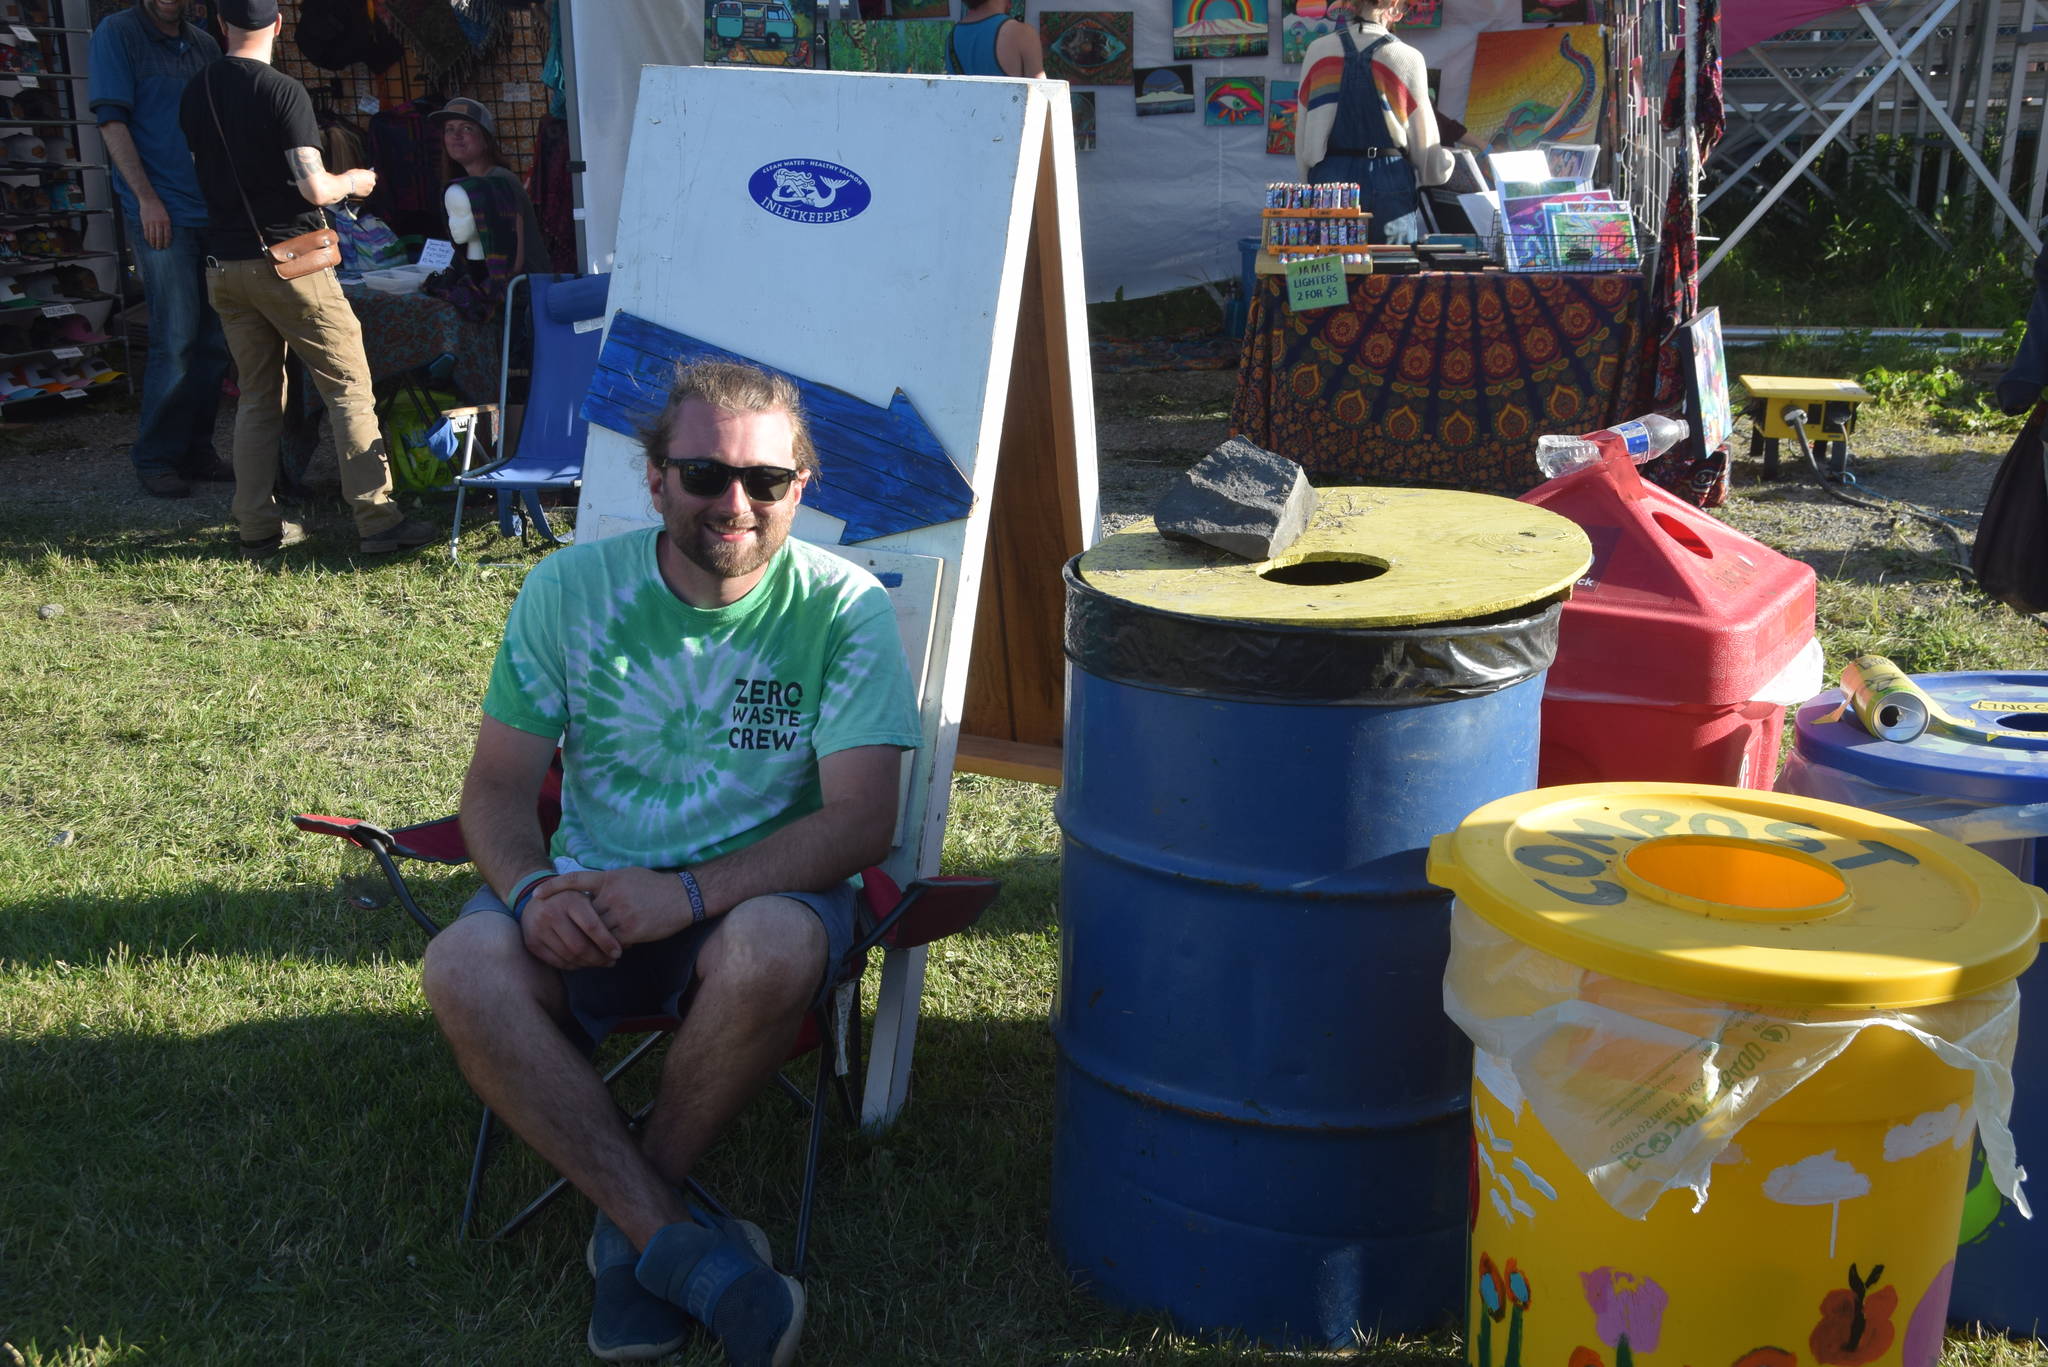 Zero Waste Volunteer Organizer Ryan Astalos smiles for the camera at one of the waste disposal stations during Salmonfest 2019 in Ninilchik, Alaska on August 2, 2019. (Photo by Brian Mazurek/Peninsula Clarion)